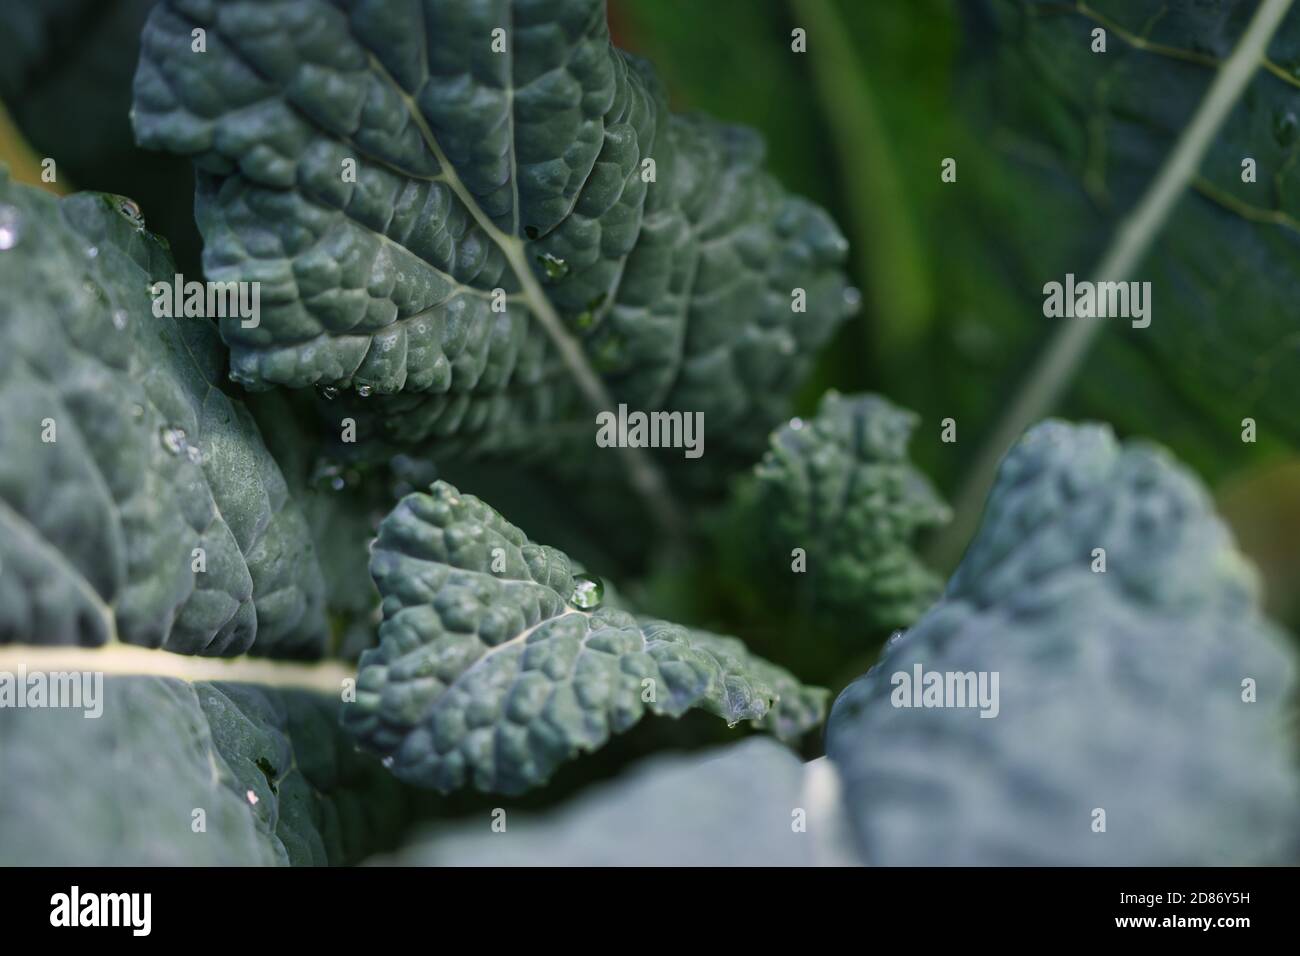 Italian palm kale dark green leaves texture close up, growing in the fall garden close up, fresh healthy food and self sufficency gardening concept Stock Photo